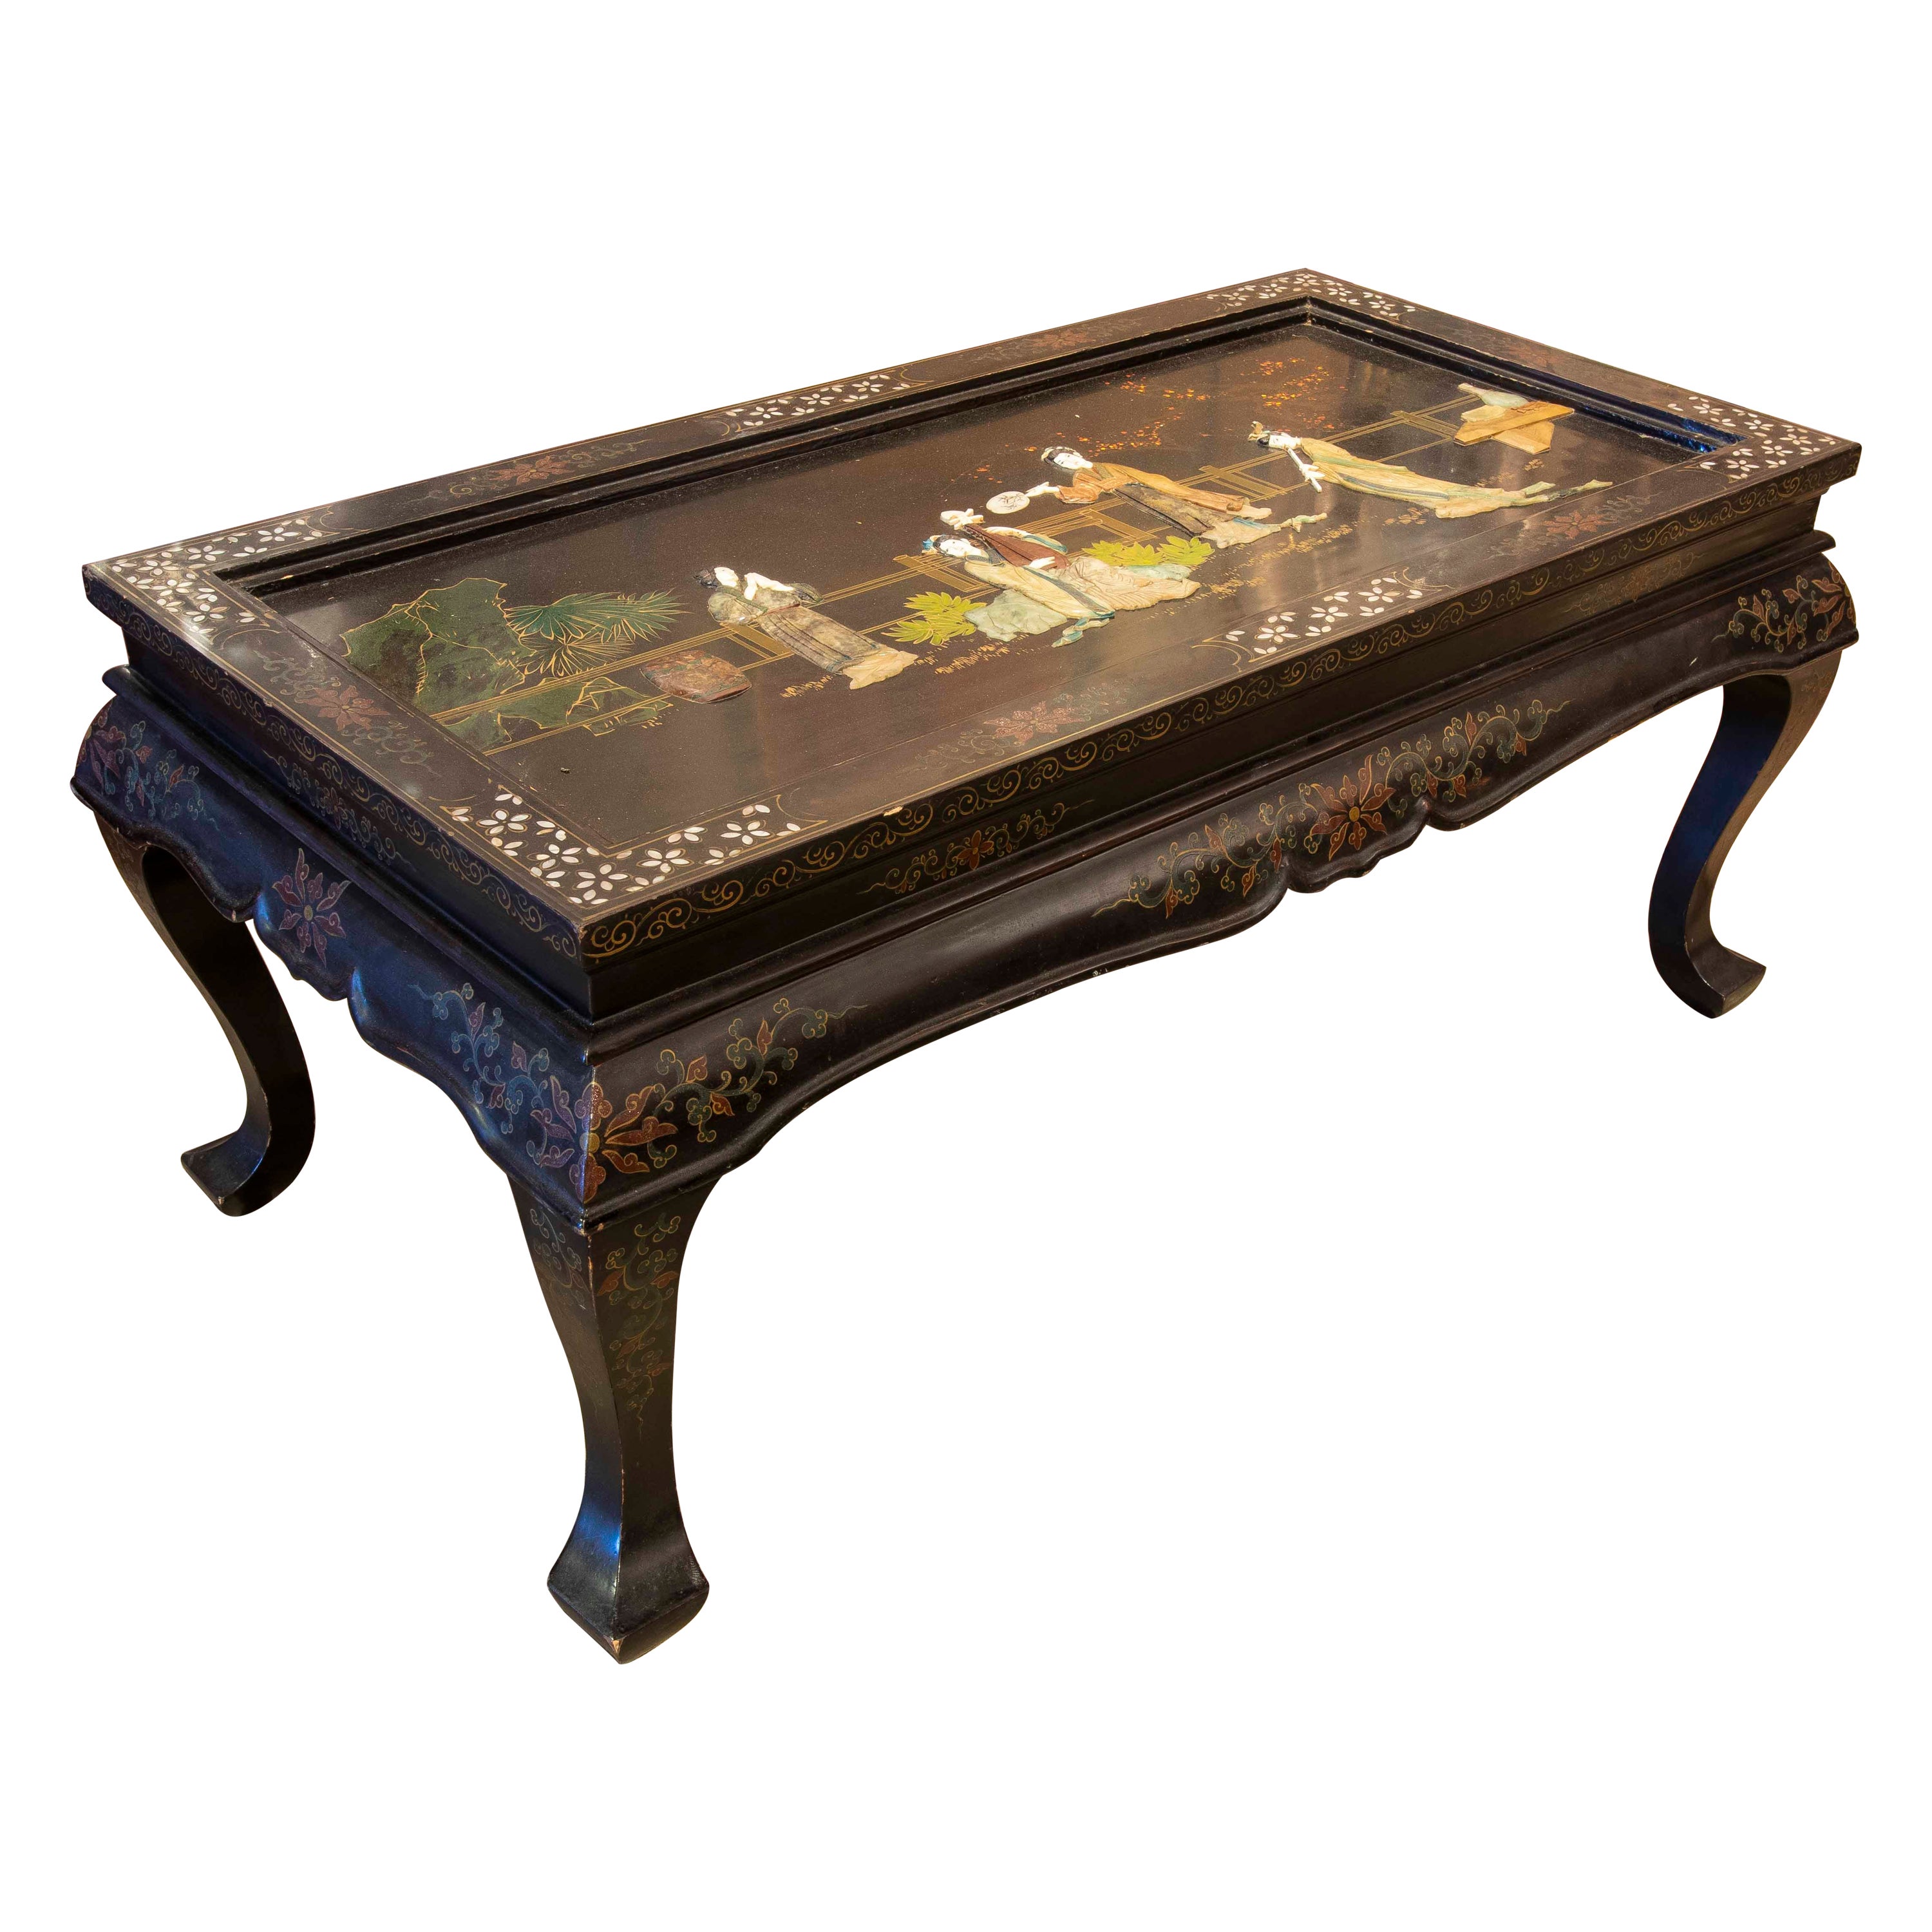 Oriental Coffee Table Lacquered in Black and Decoration of Characters with Stone